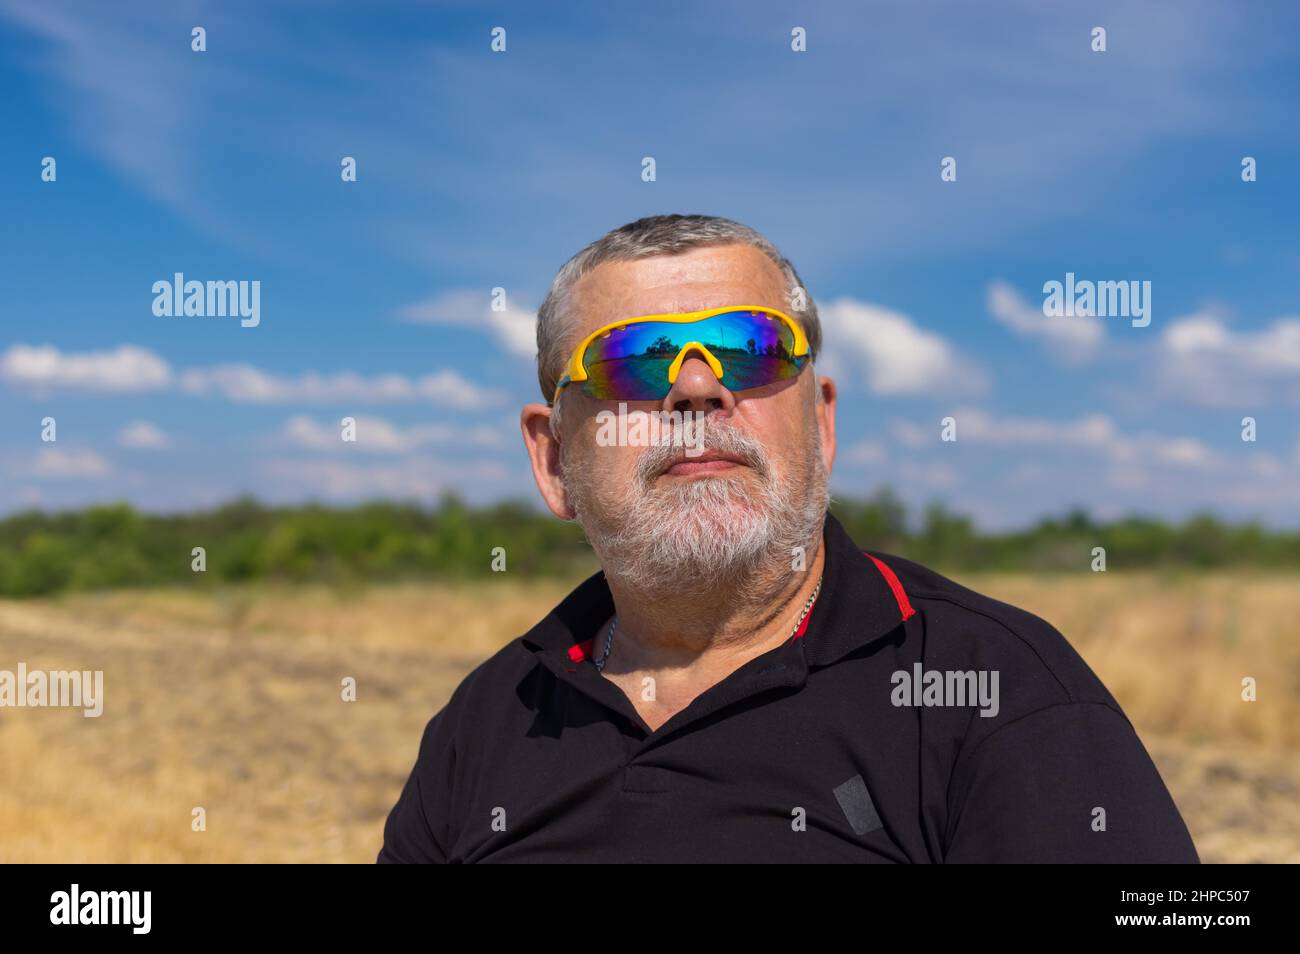 Outdoor portrait of a bearded senior in sunglasses against blue cloudy sky and agricultural field Stock Photo